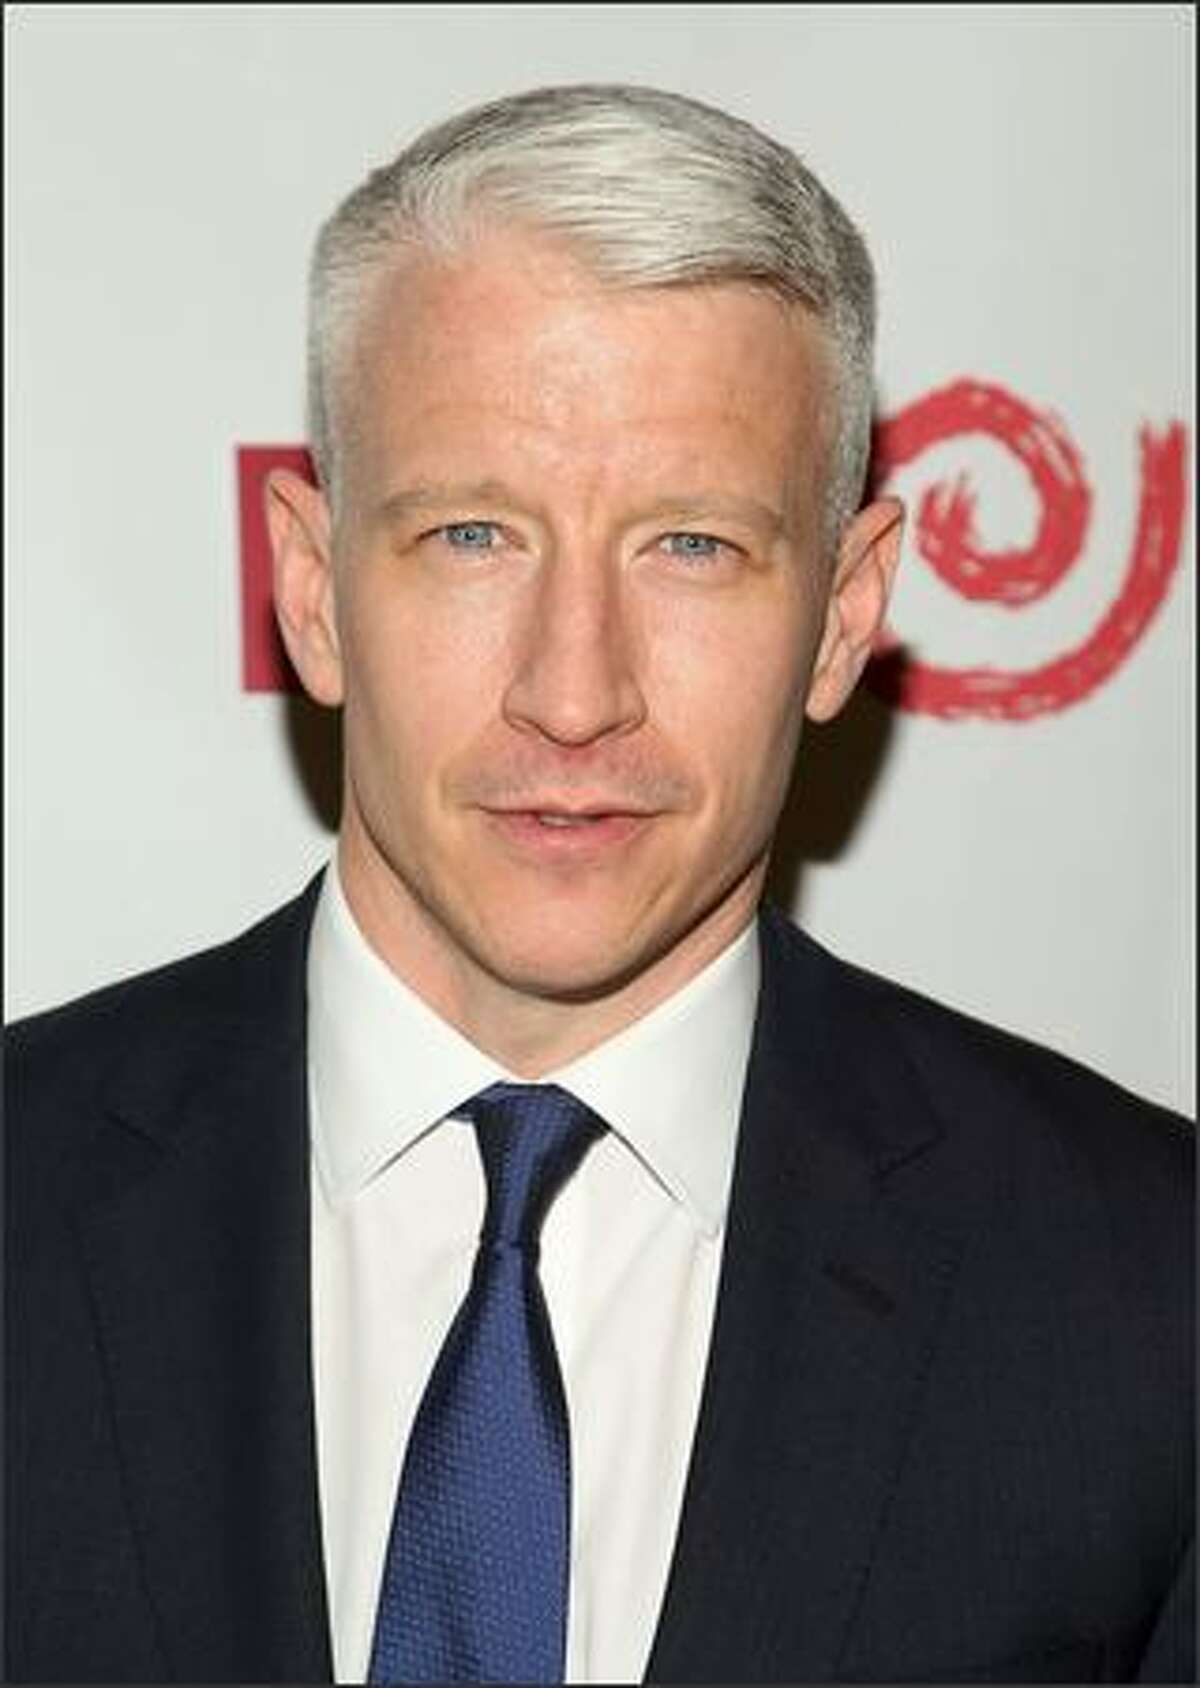 CNN anchor Anderson Cooper attends the 5th Annual Wayuu Taya Fundraising Gala at The Bowery Hotel in New York.